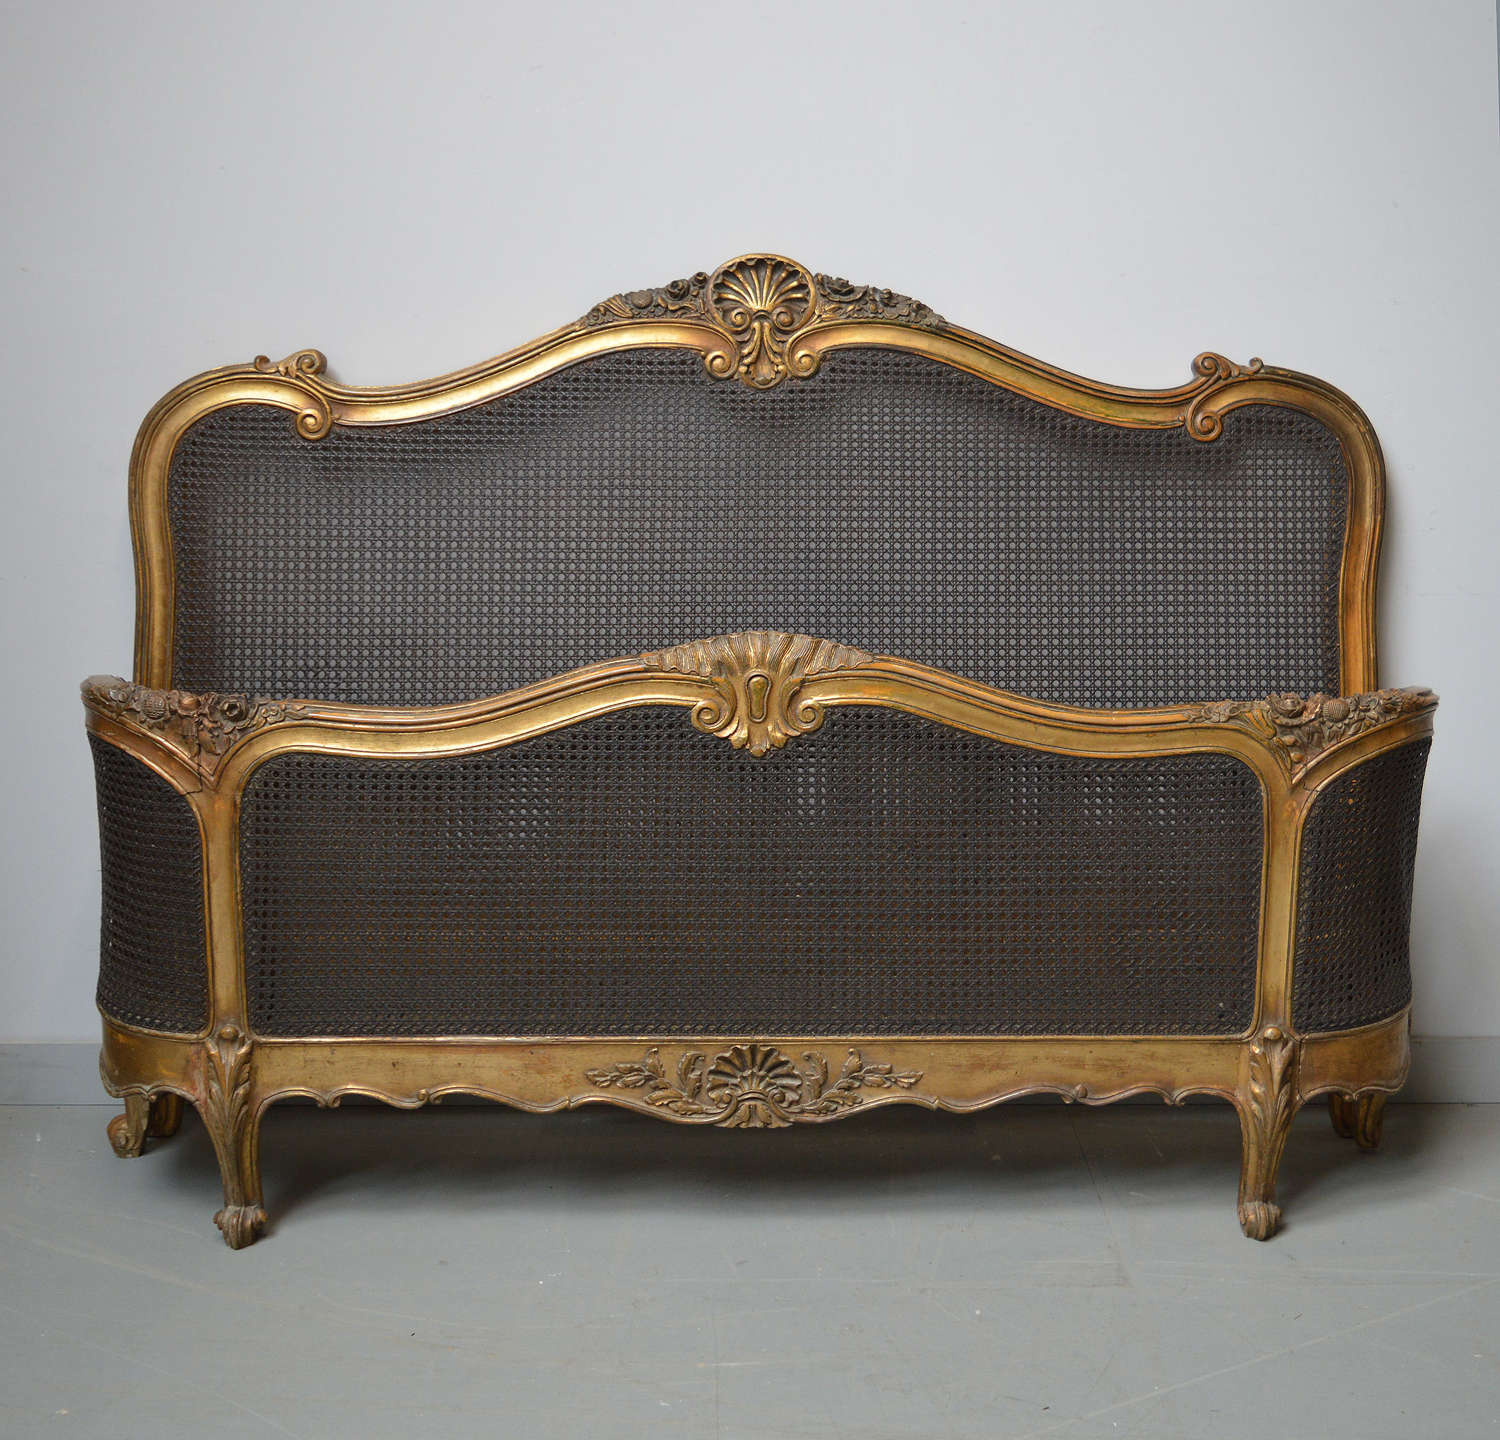 King Size Gilt-wood Louis XV style bedstead